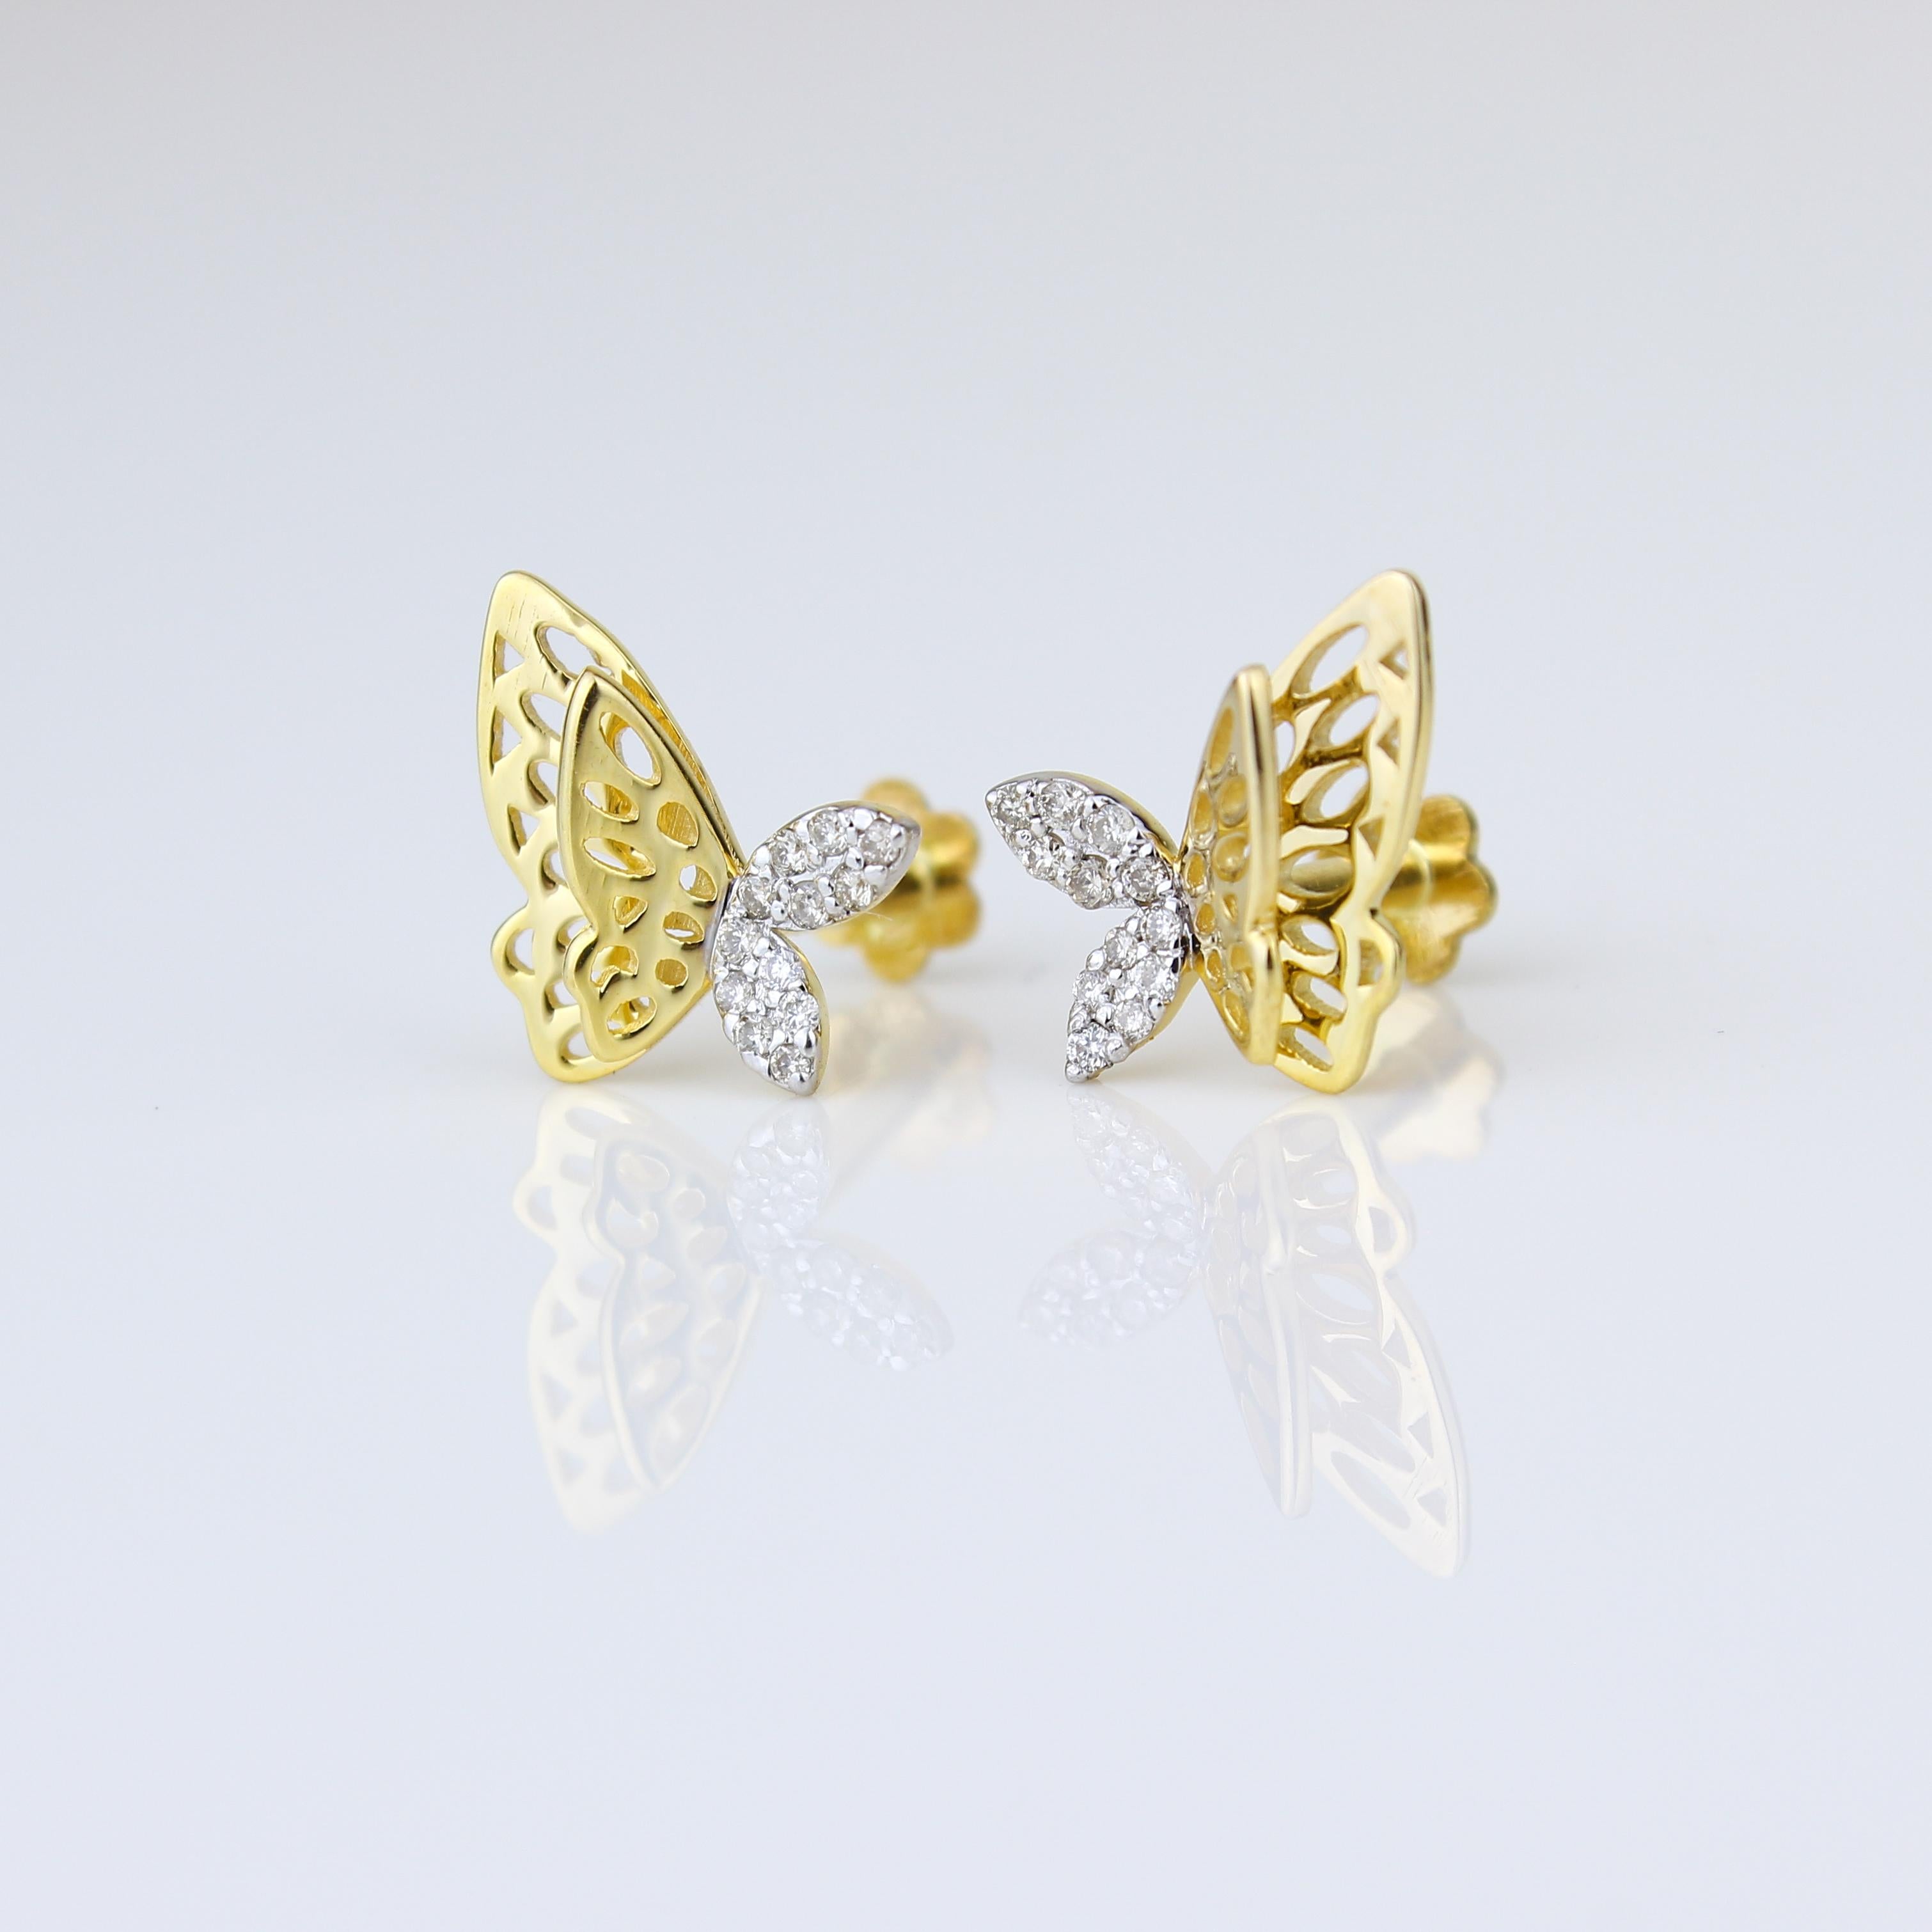 
The Double Winged Butterfly Diamond Kid Earrings are a whimsical and enchanting addition to any young jewelry collection. Crafted with precision from 18K solid gold, these earrings showcase a delightful butterfly design with two intricate wings,